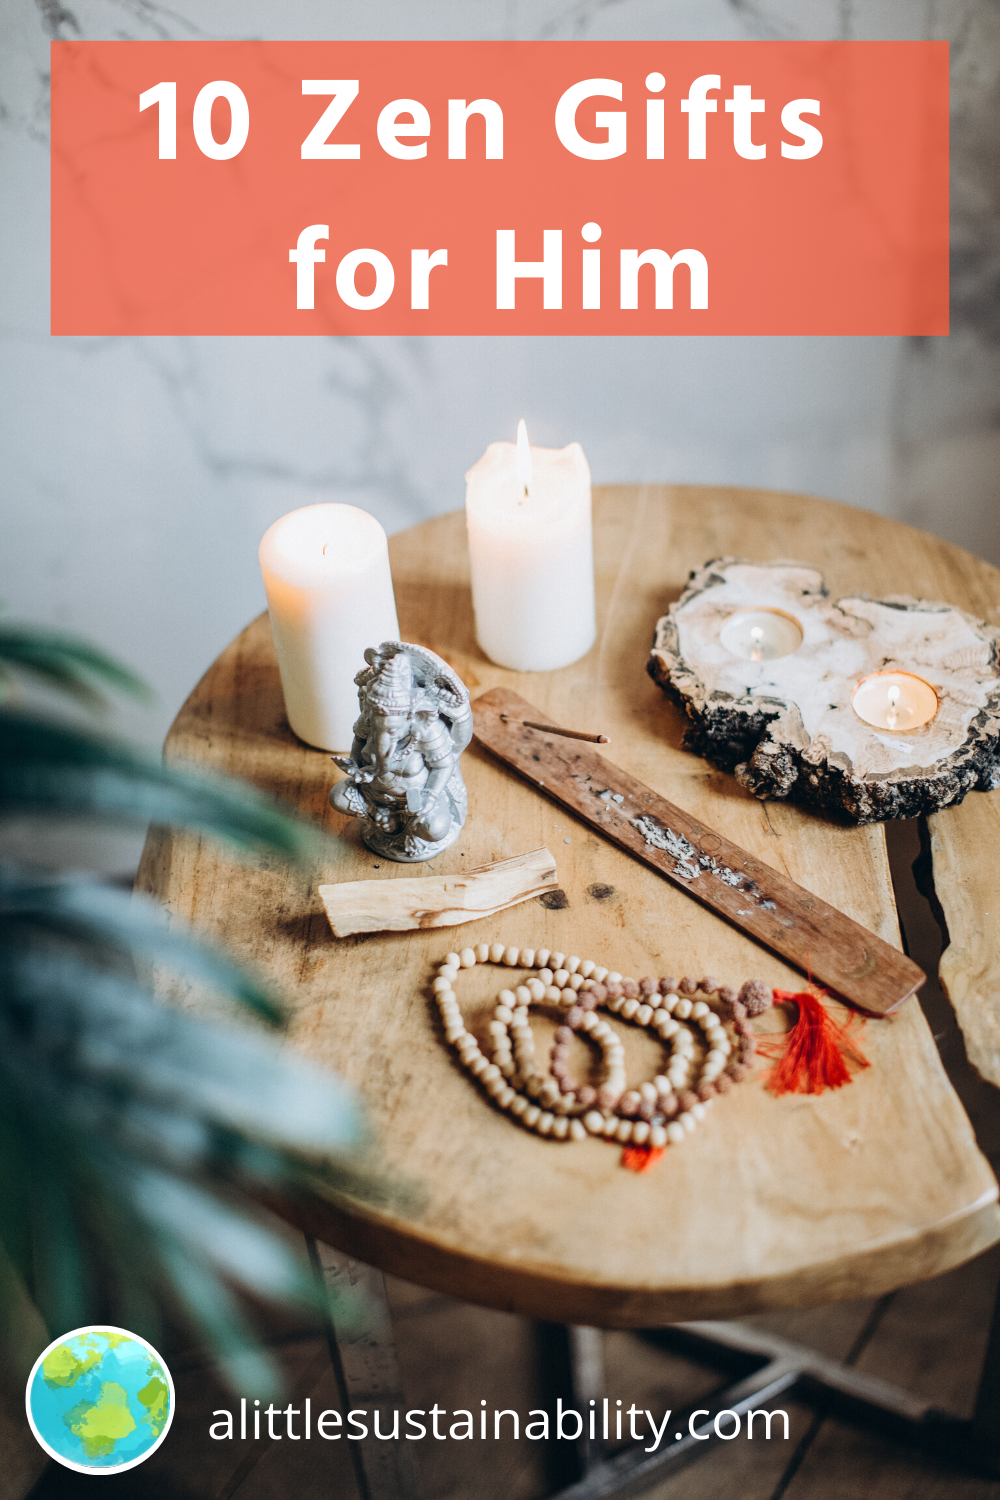 The best zen and meditation gifts for him. From products for mindfulness, to meditation decor gifts, to special meditation experiences. #zenroom #giftideas #giftsforboyfriend